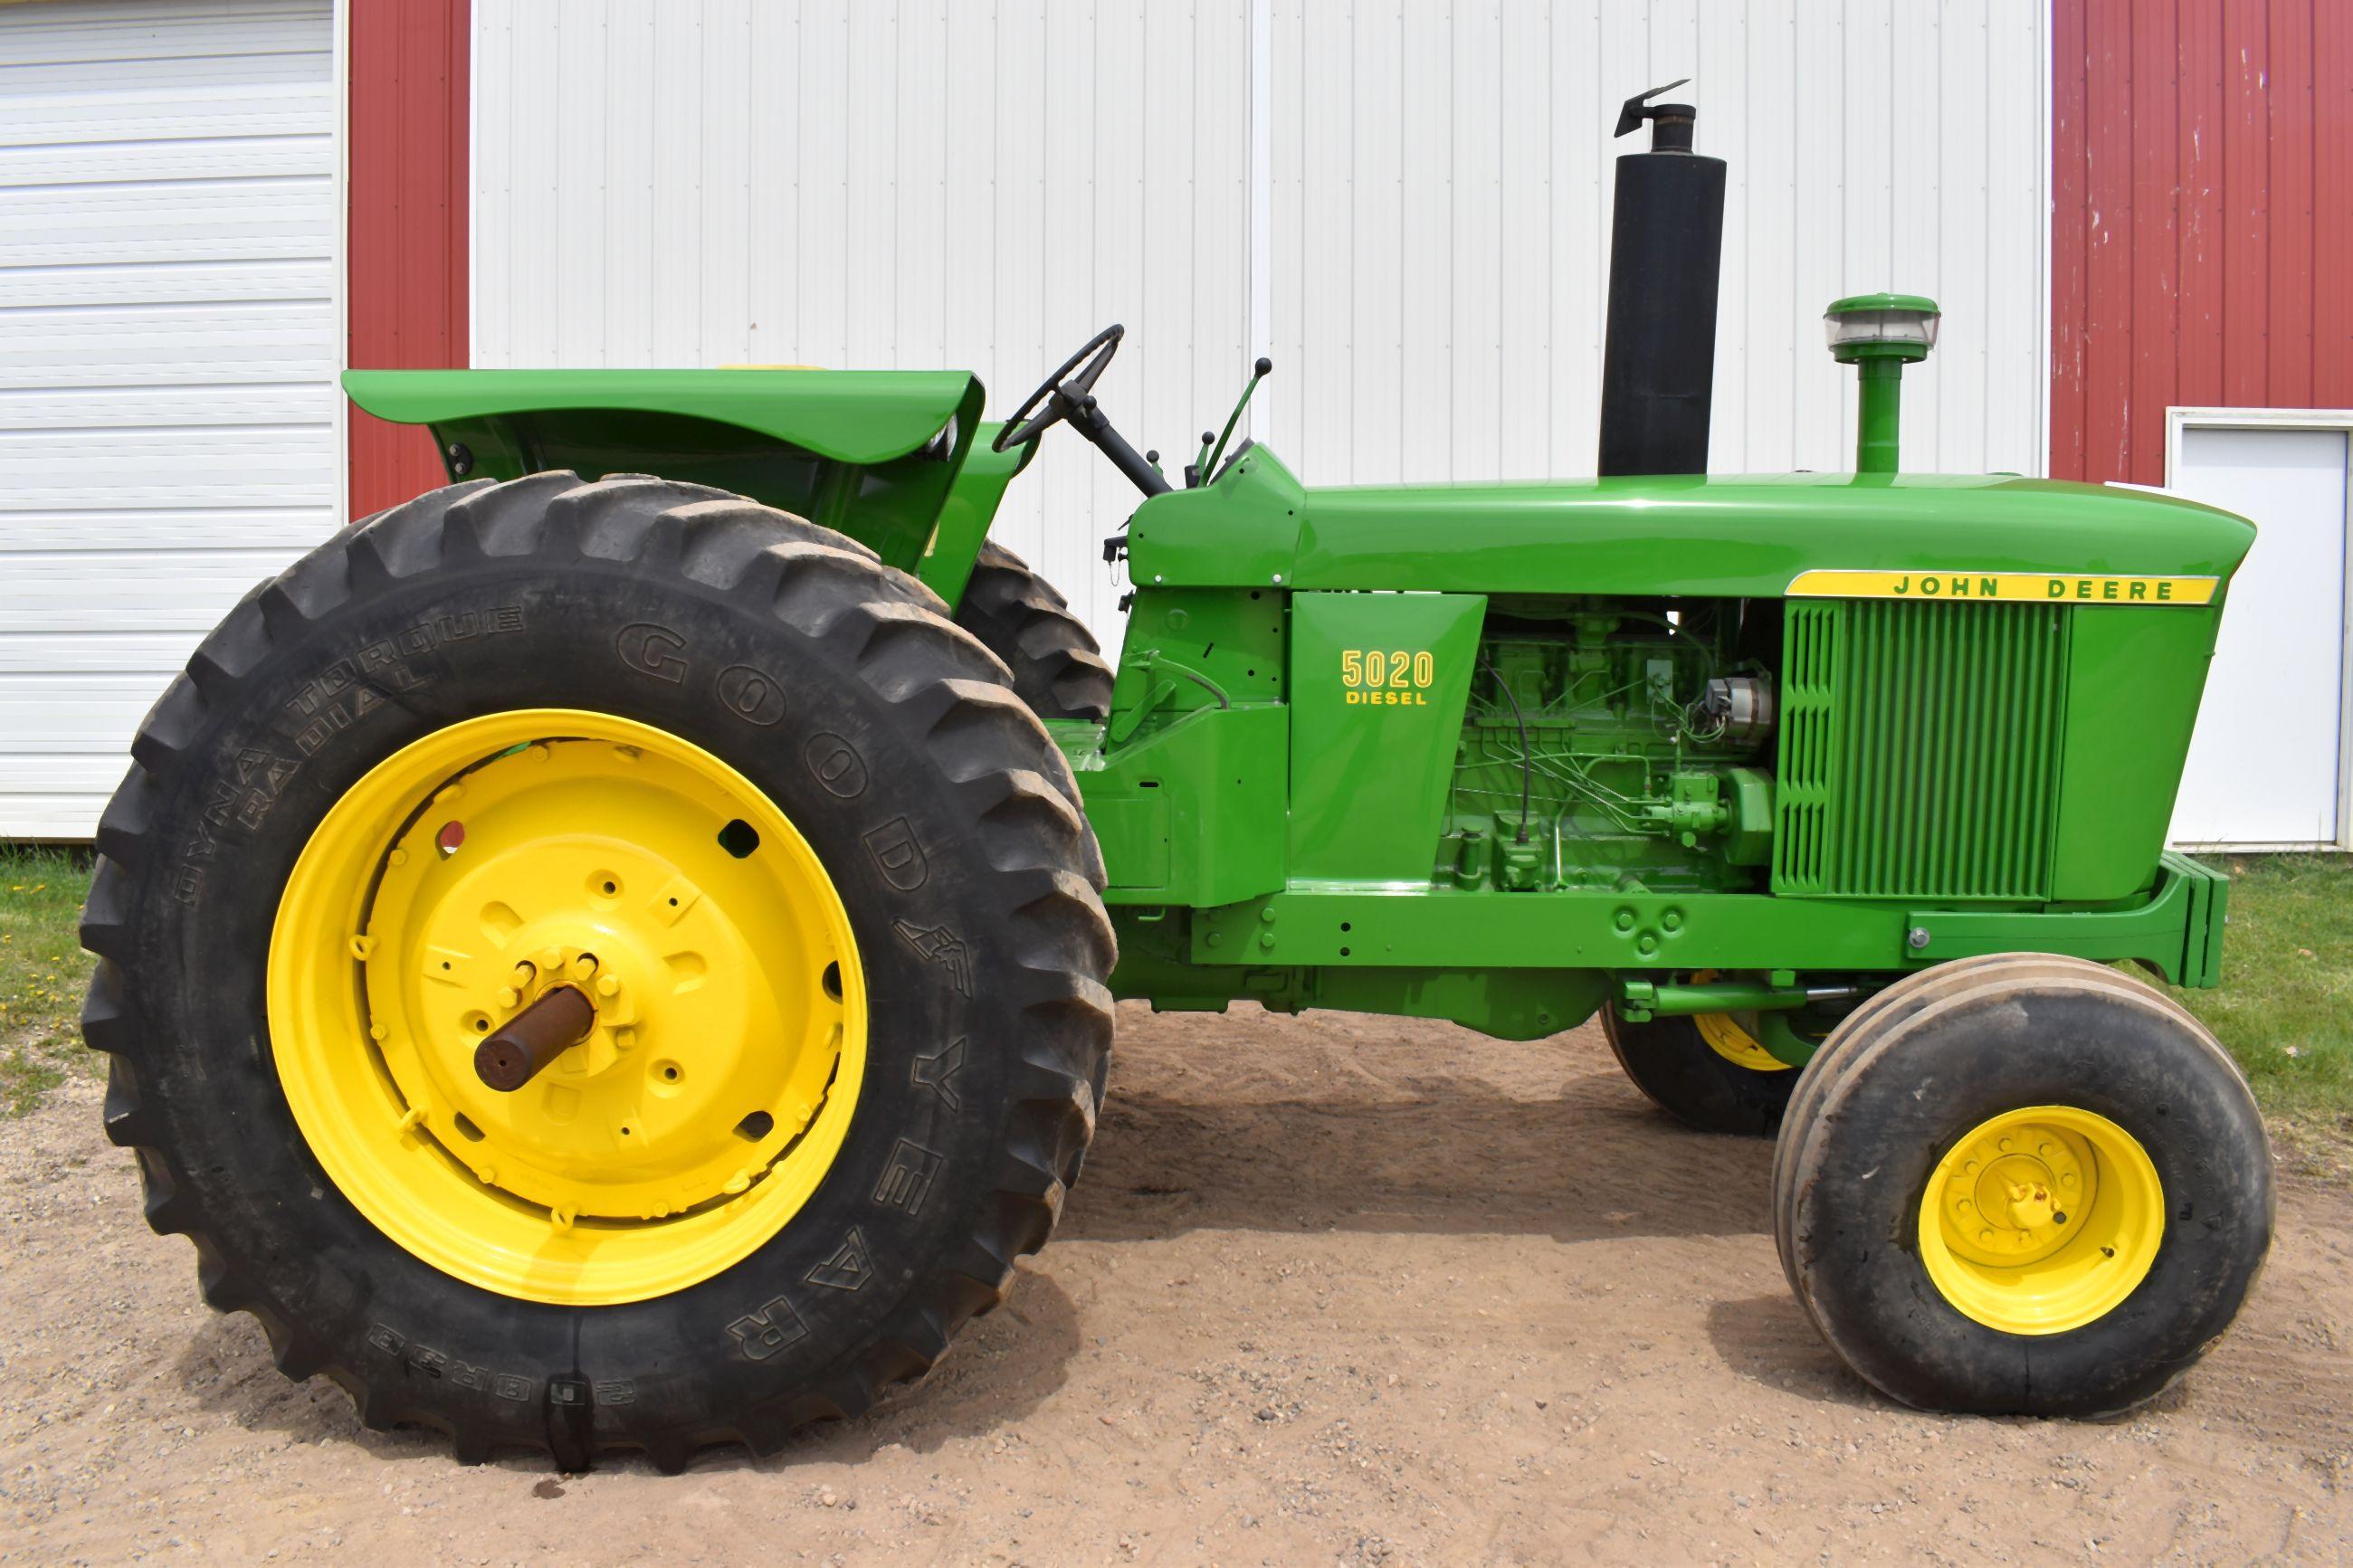 1968 John Deere 5020 Diesel Tractor, Wide Front, Open Station, Front Starter Weights With 2 Slabs, F